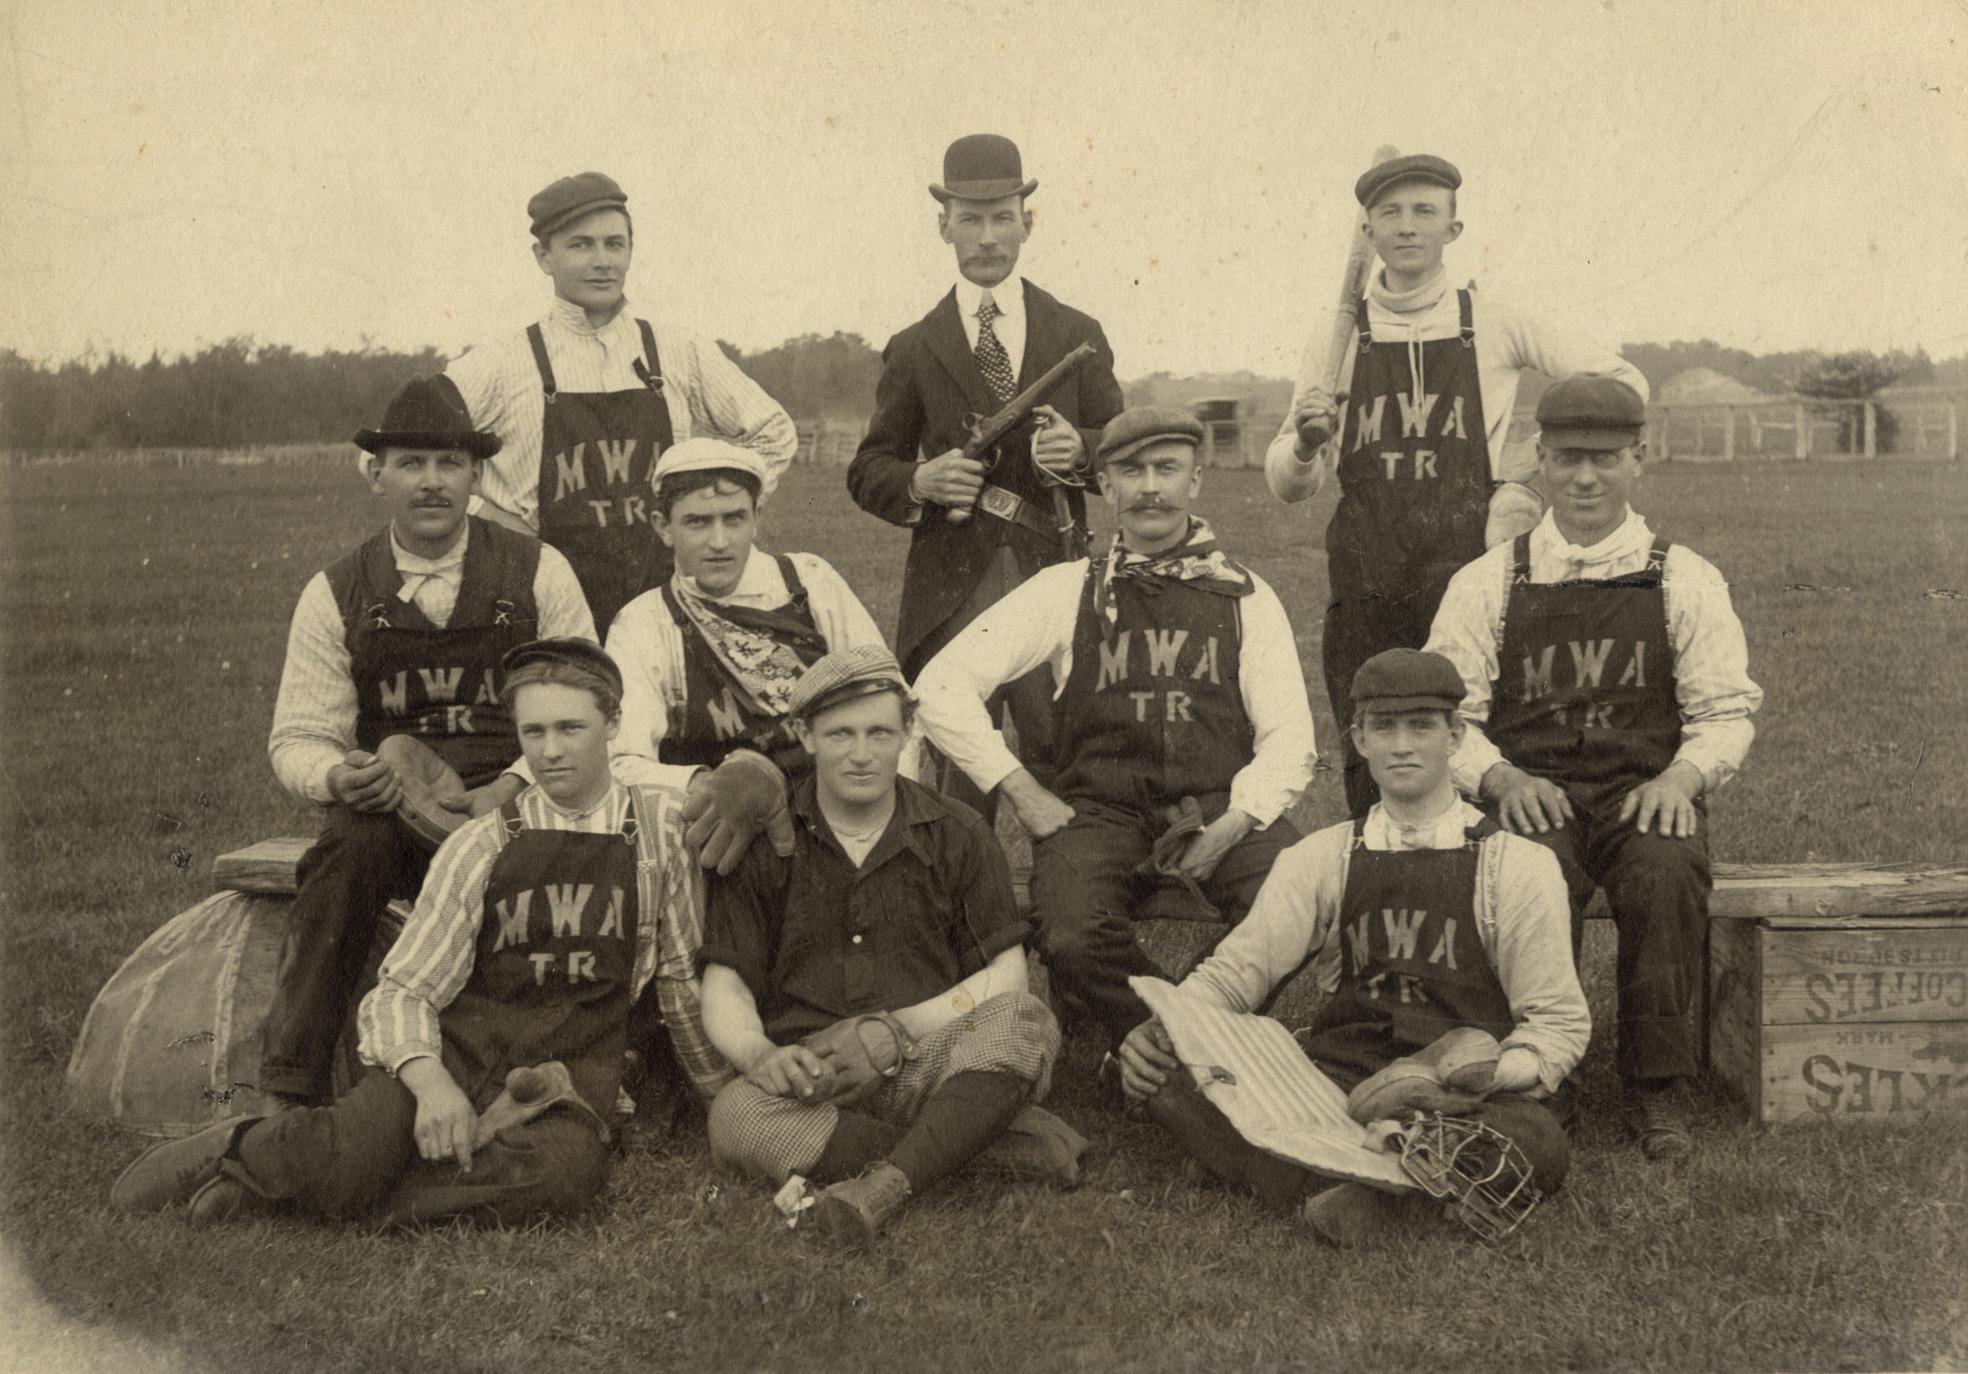 Local History Notes: Old Time Baseball Team, Early 1900s